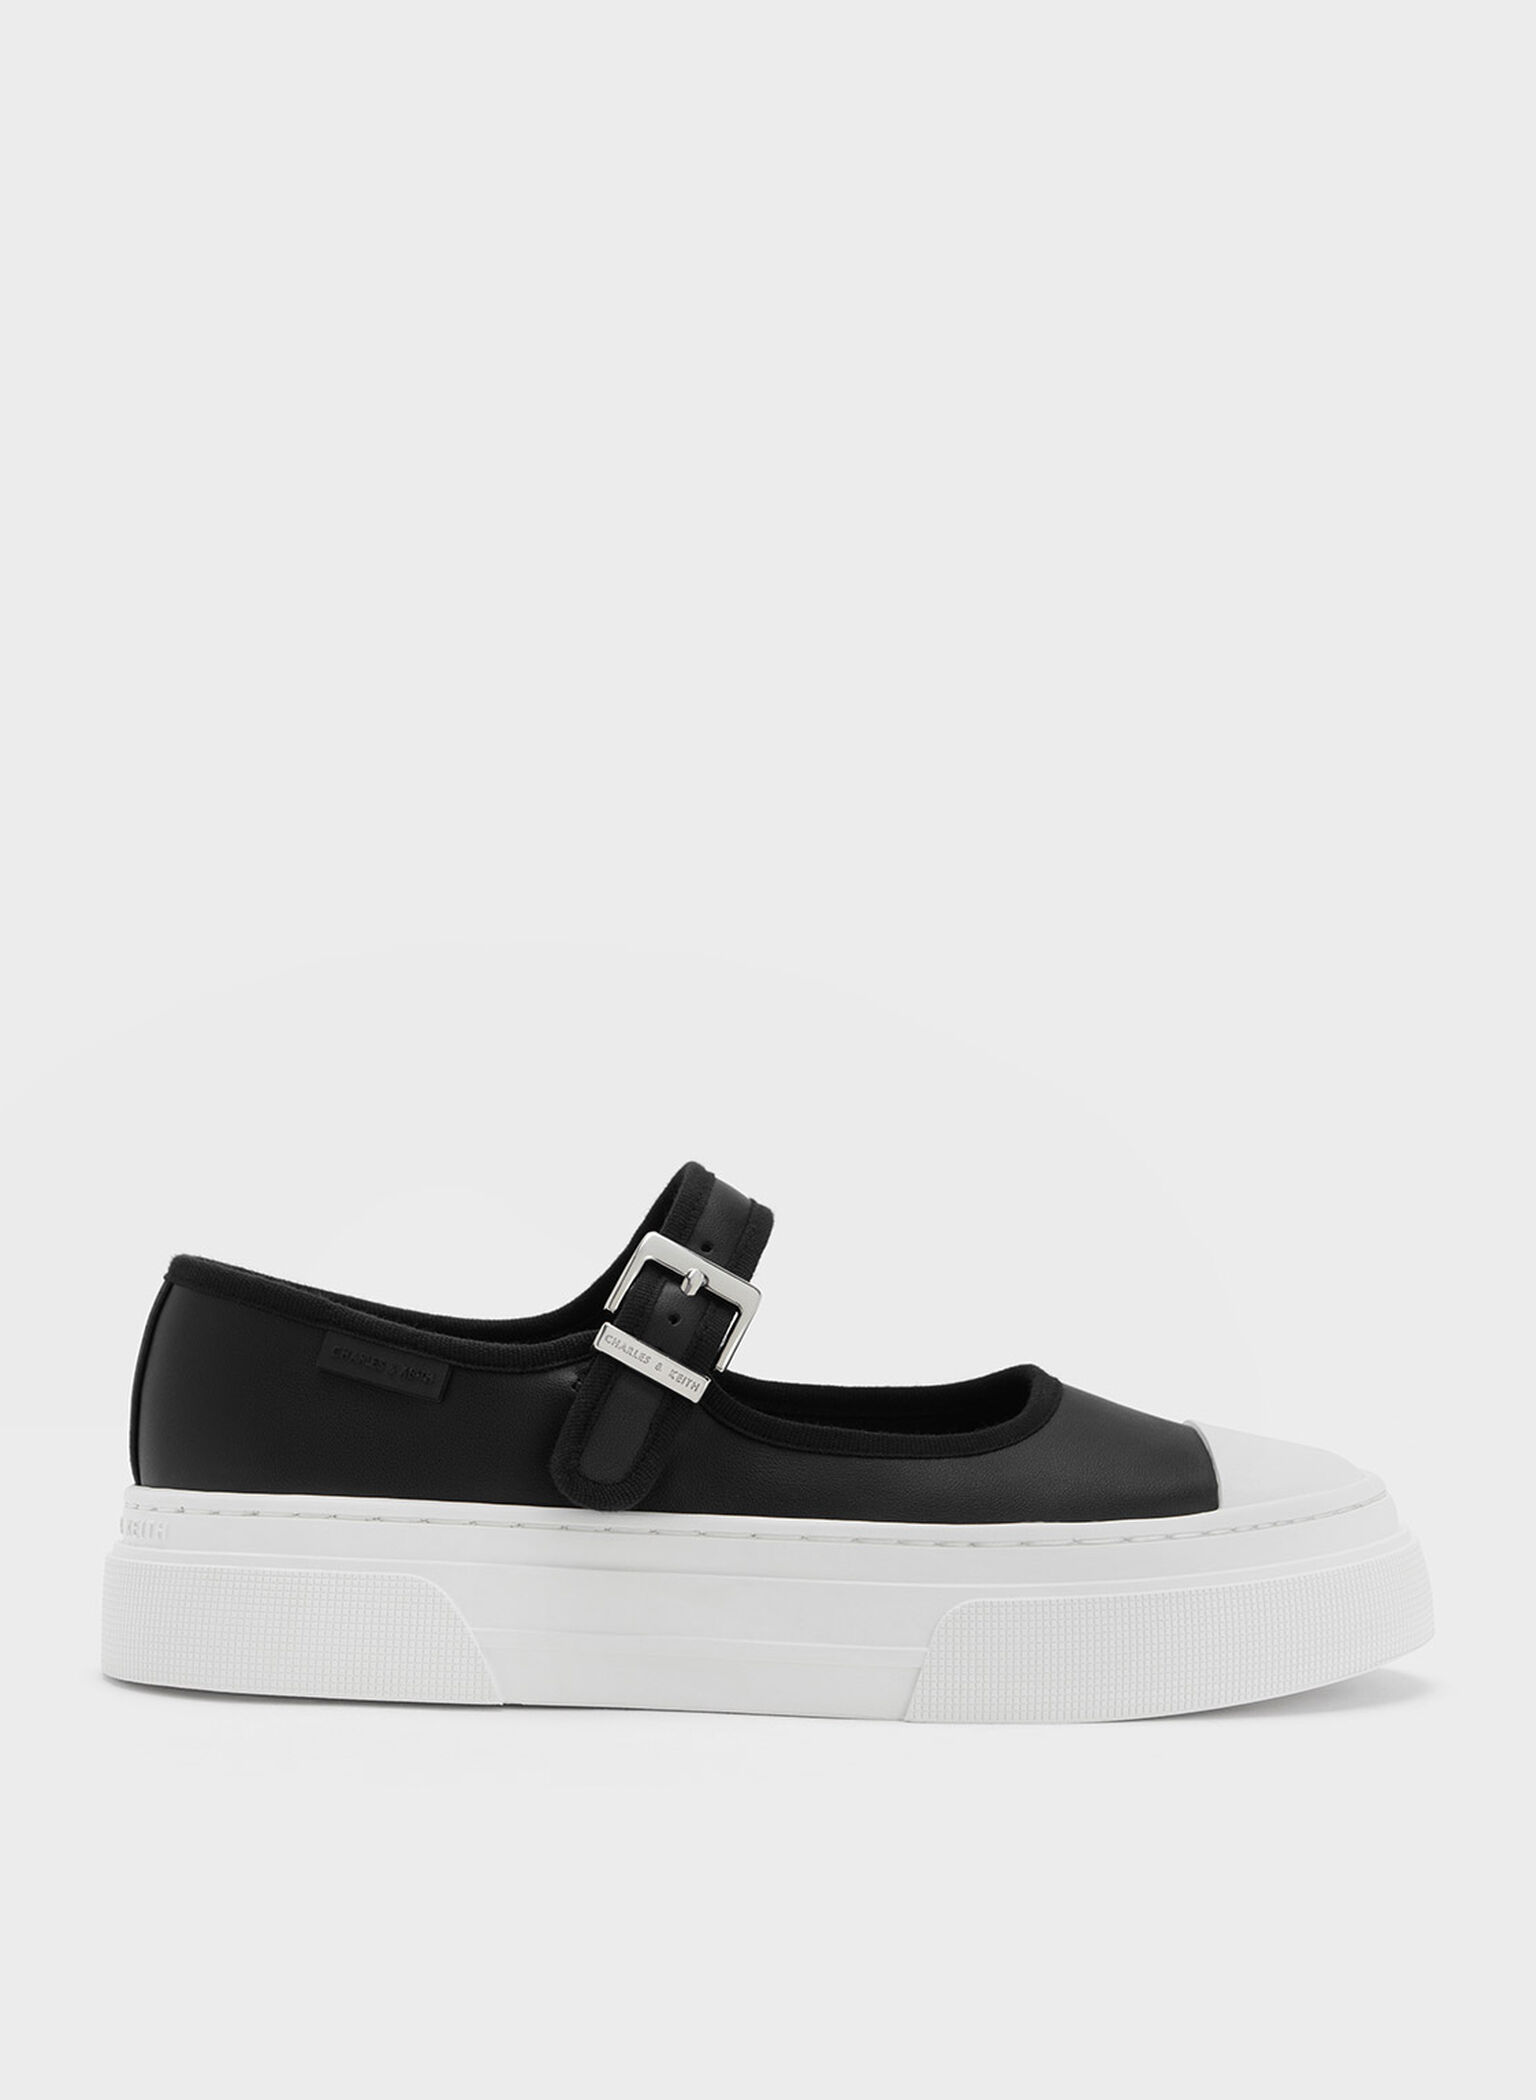 Two-Tone Mary Jane Sneakers, Black, hi-res